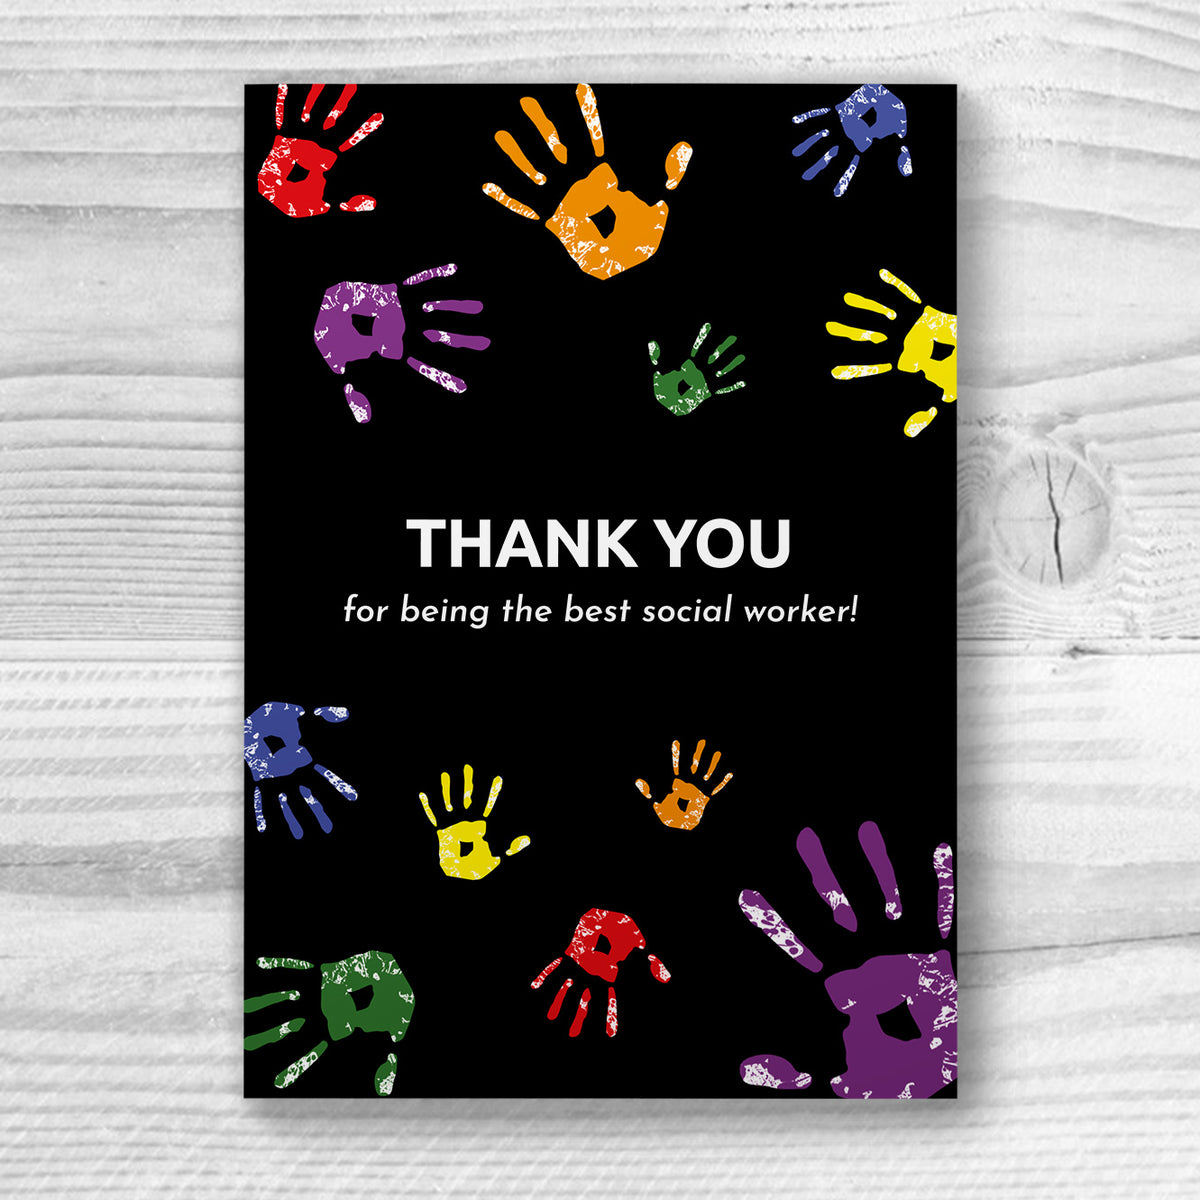 Thank you for being the best social worker - Adoption Card | Gift